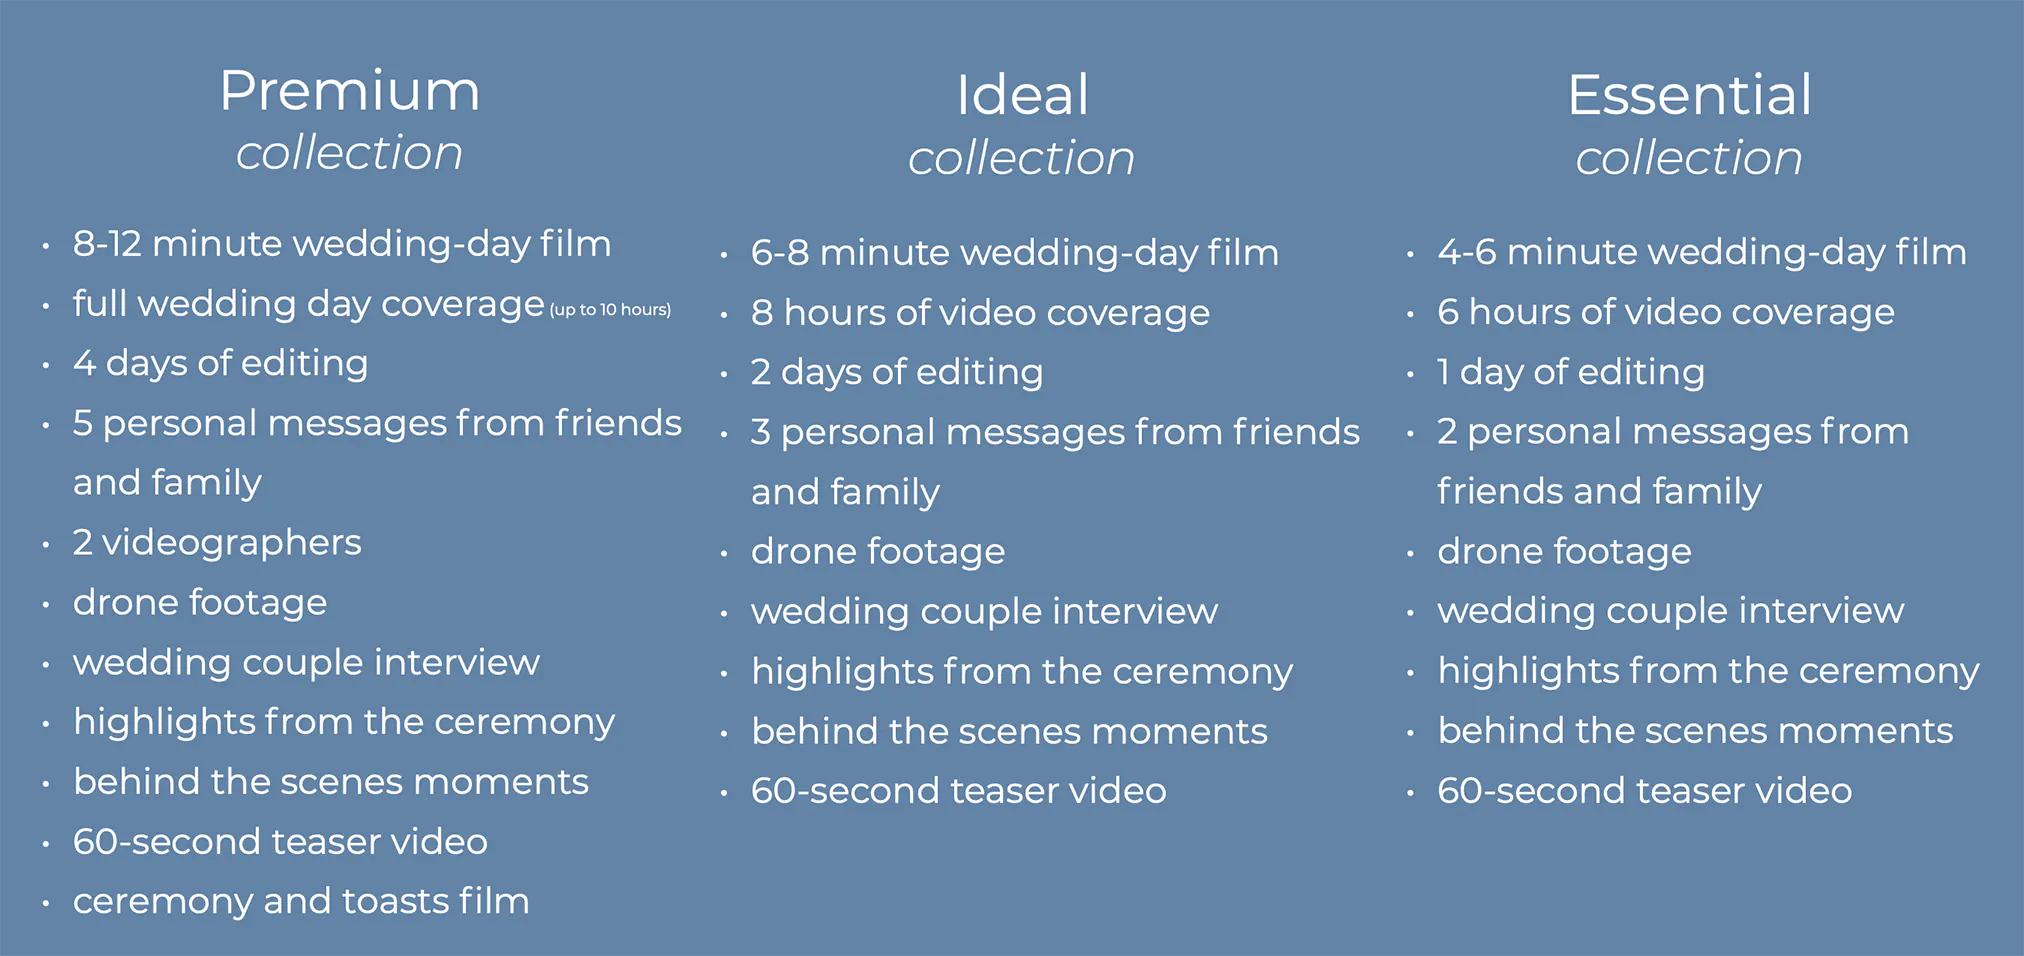 wedding film collections info